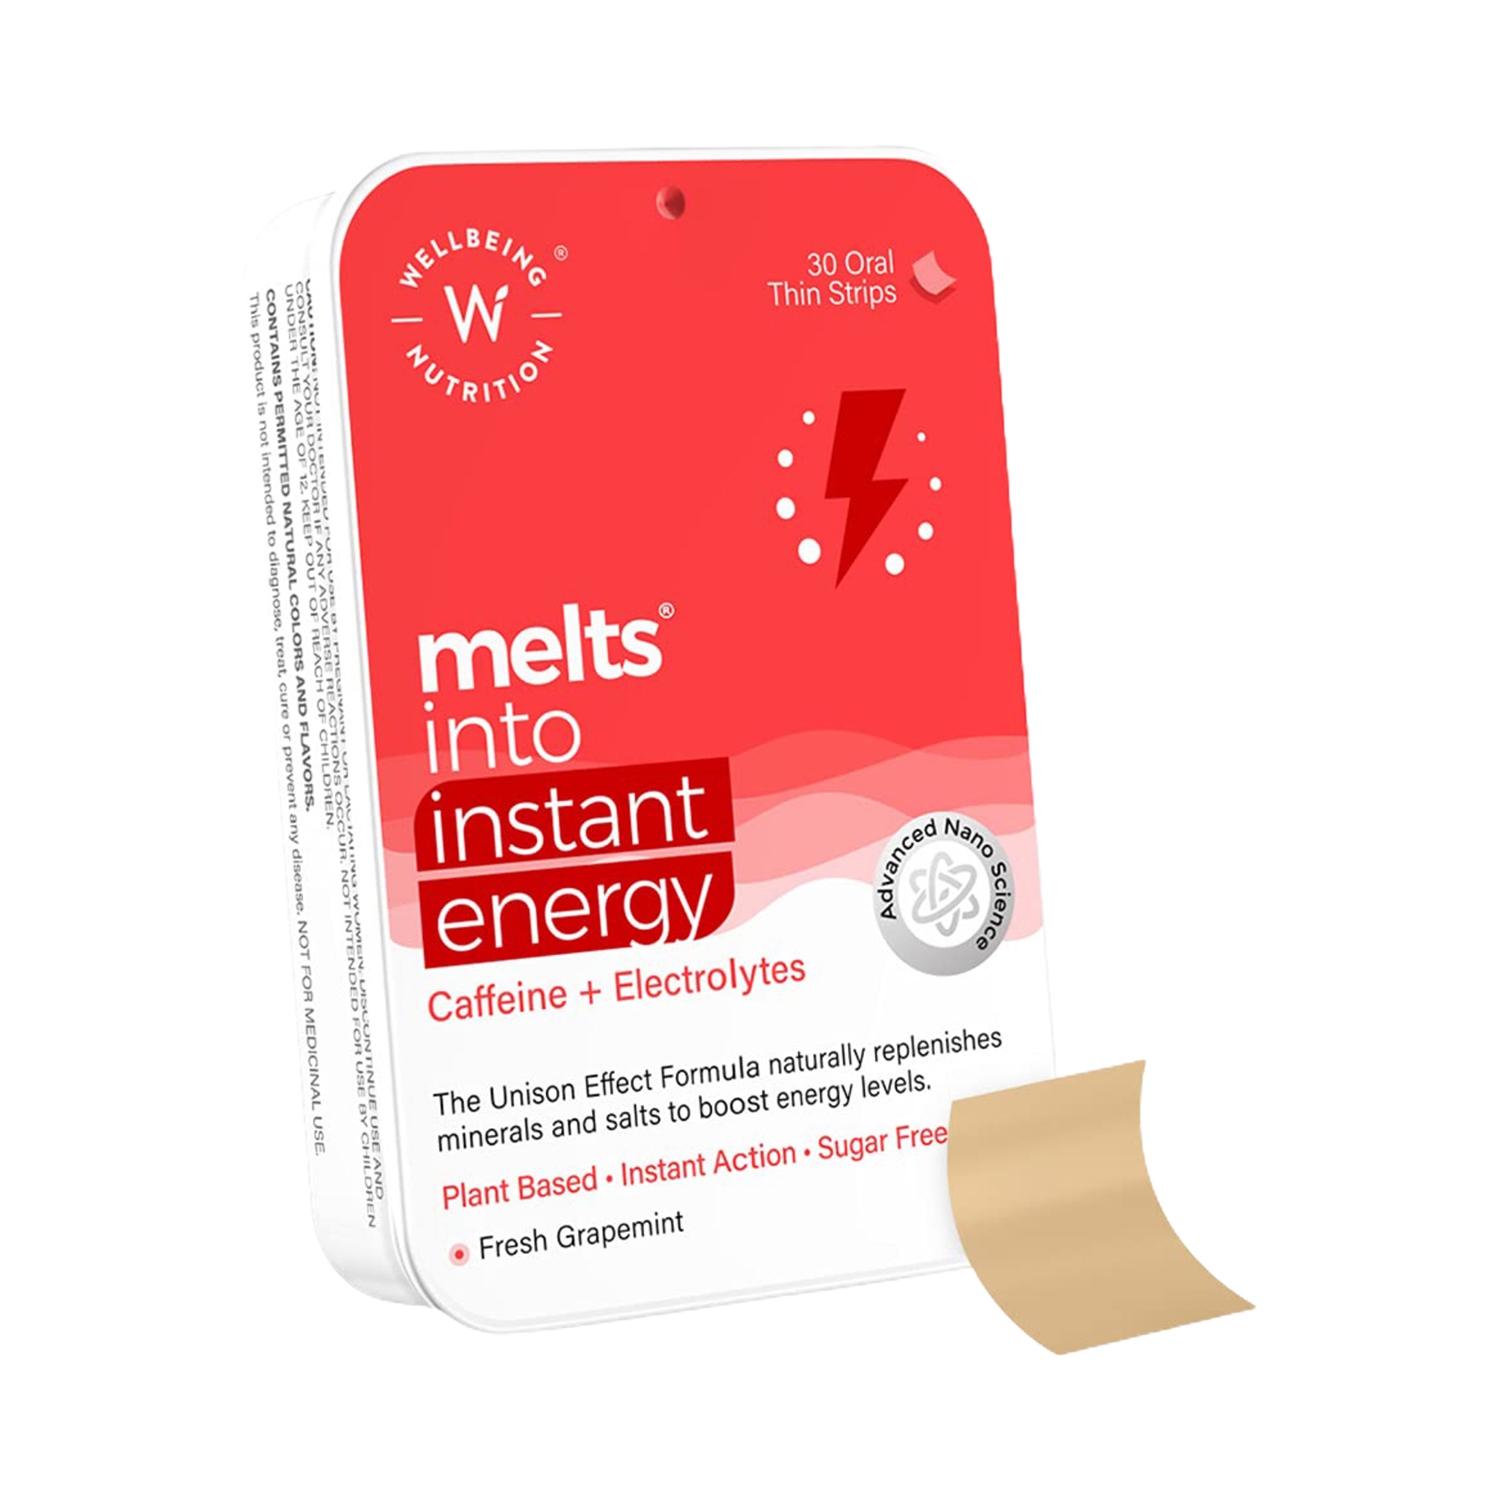 Wellbeing Nutrition | Wellbeing Nutrition Melts Instant Energy with Green Tea Caffeine & Electrolytes for Endurance